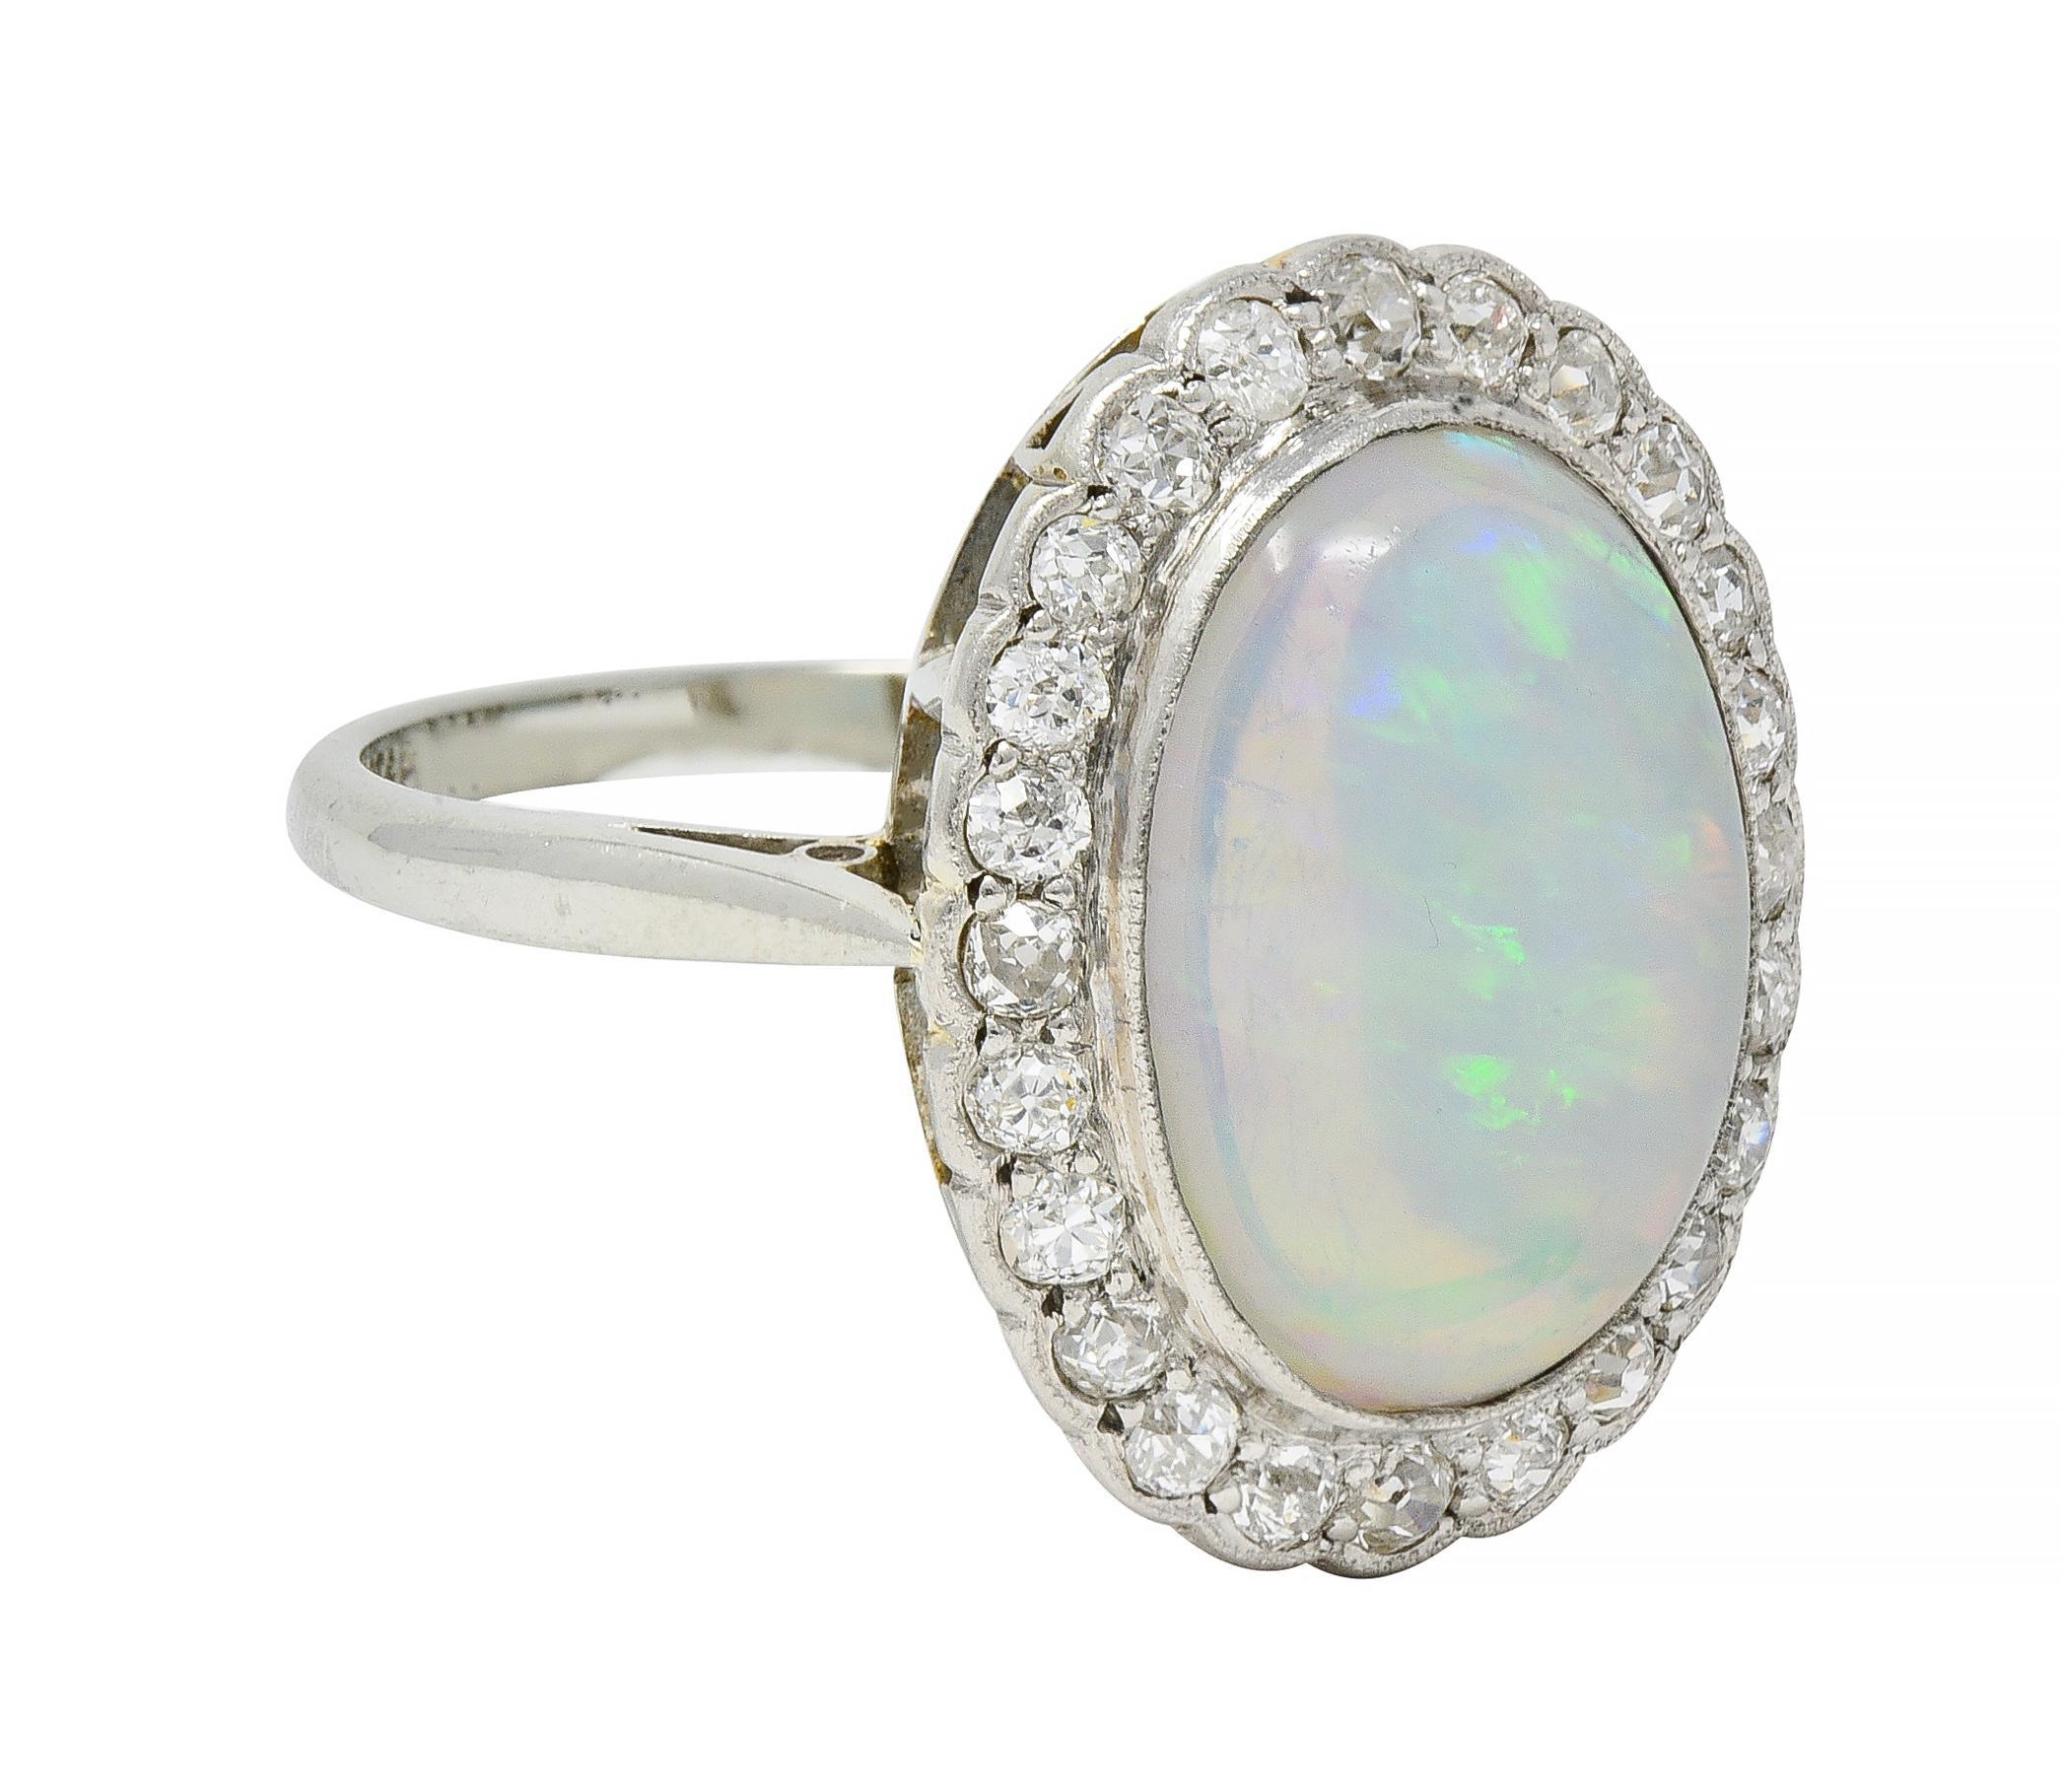 Centering an oval-shaped jelly opal cabochon measuring 10.5 x 13.0 mm bezel set in platinum-topped gold
Transparent white in body color with spectral play-of-color 
Featuring a halo surround of old European cut diamonds 
Weighing approximately 0.72